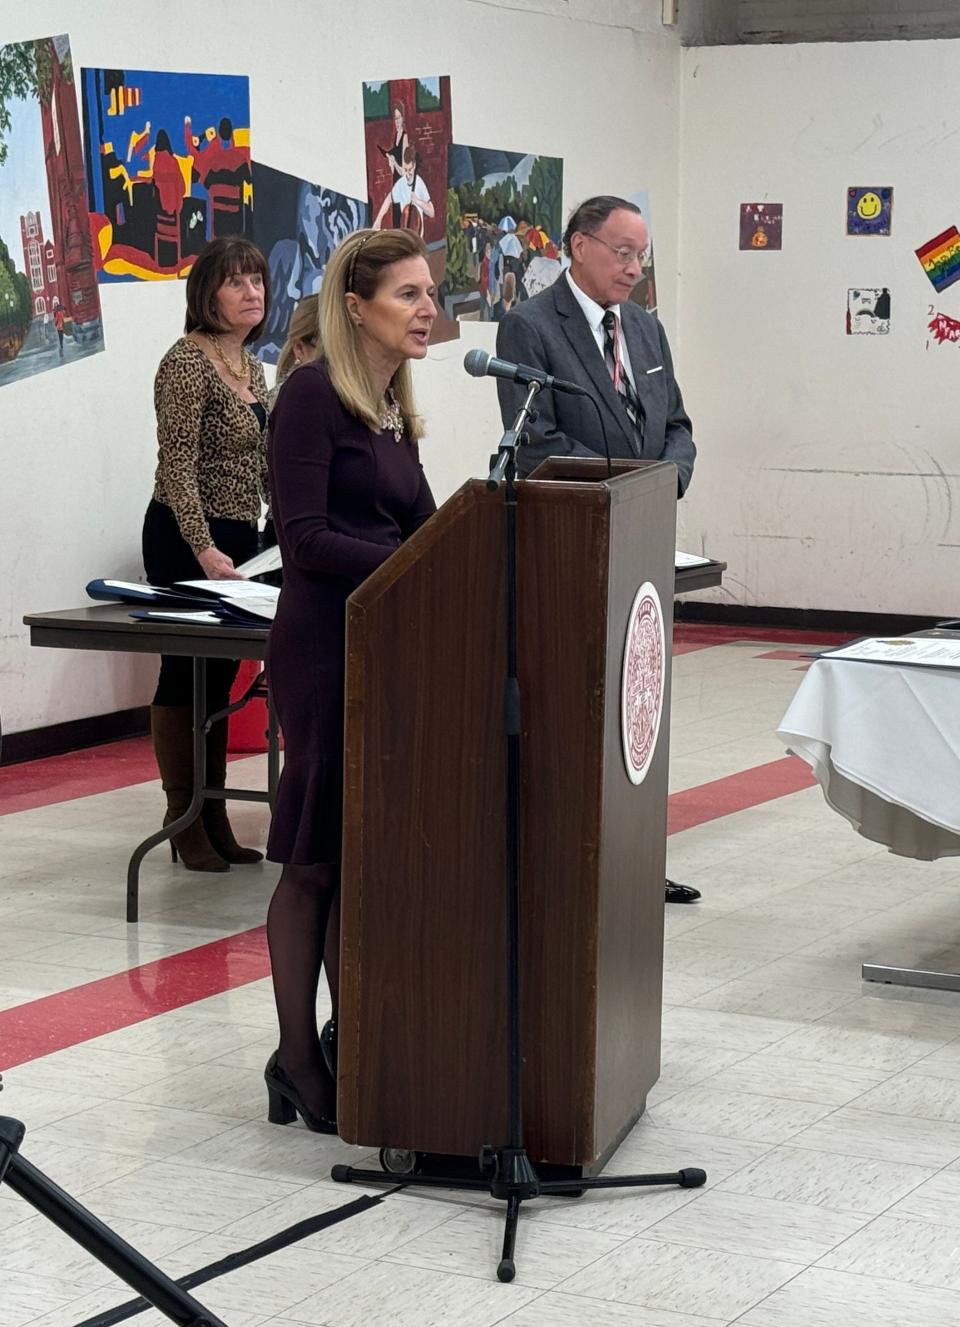 Lt. Gov. Susan Bysiewicz speaks at the event honoring Martin Luther King Jr. held at Norwich Free Academy Friday afternoon.